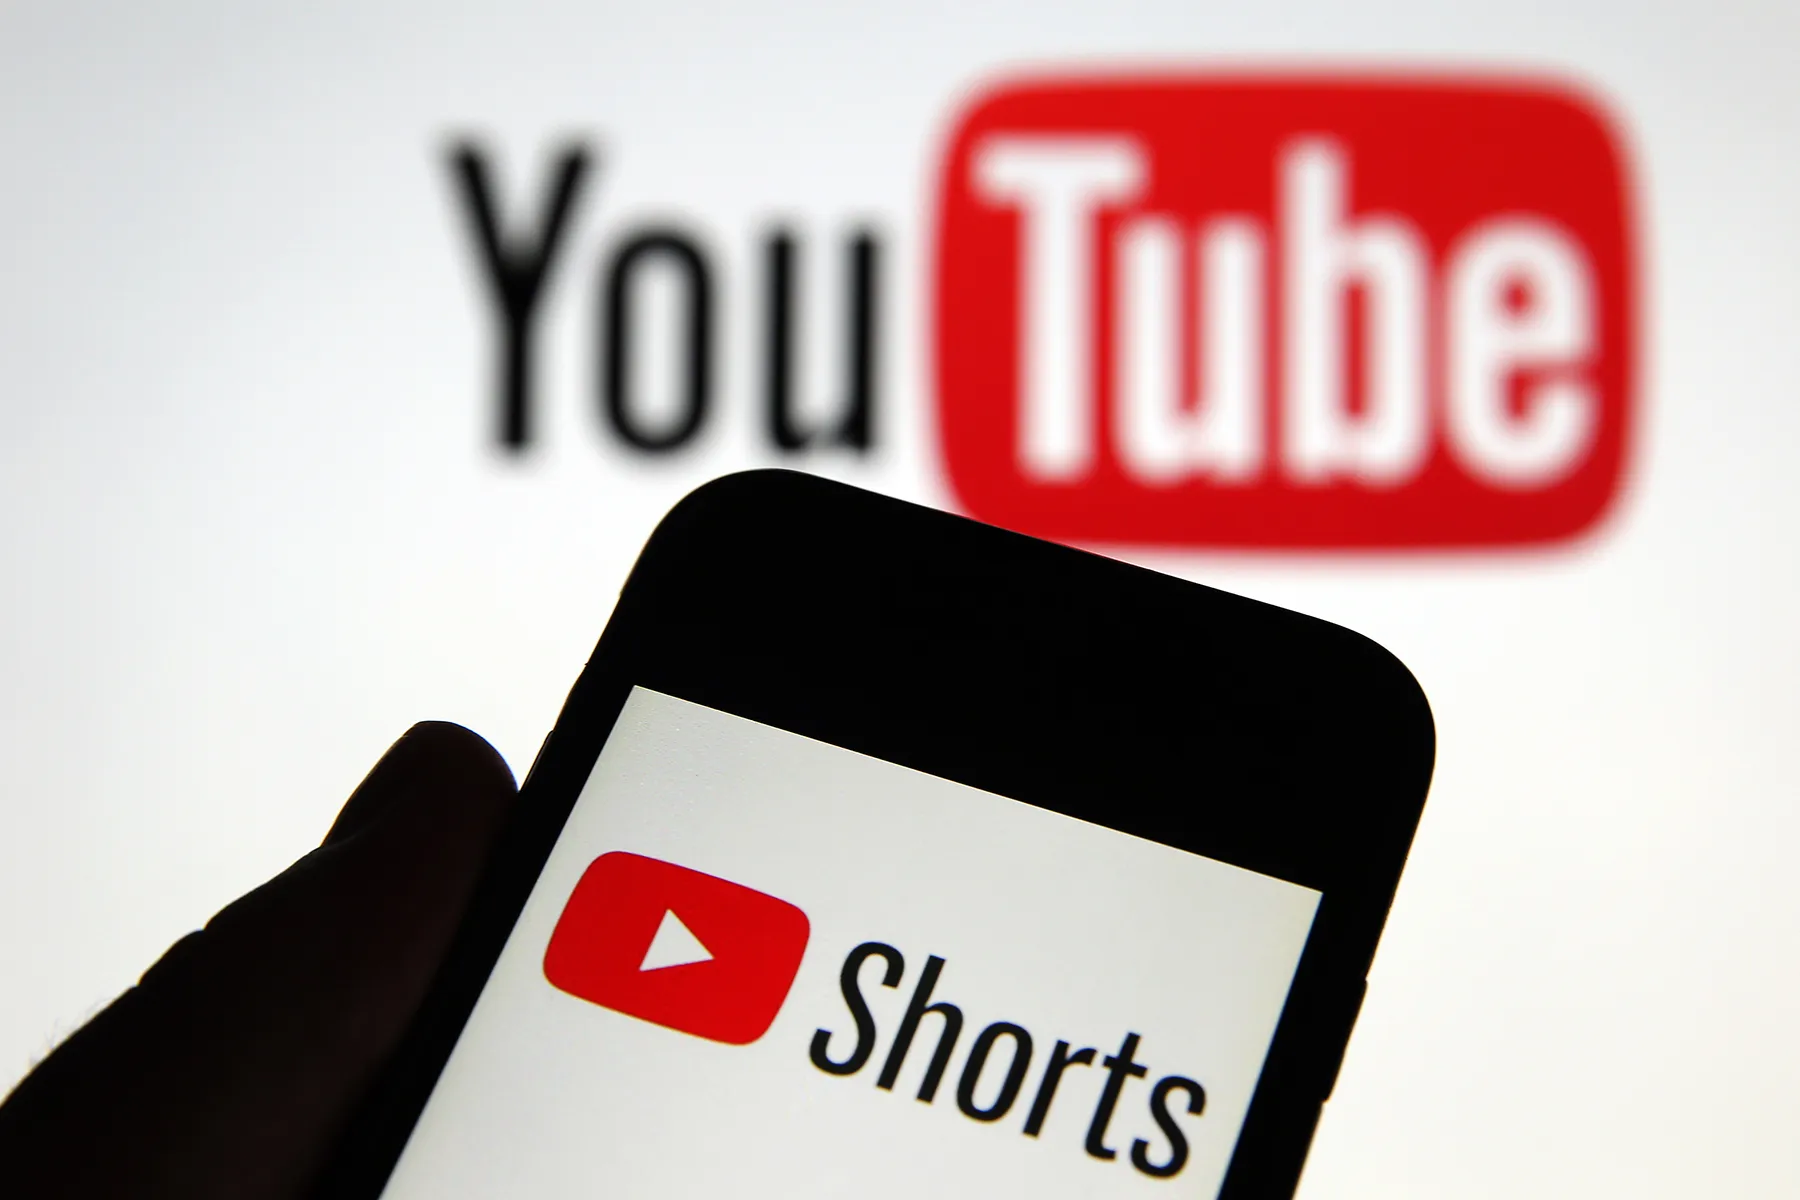 YouTube Launches Members Only Shorts: Exclusive Content for Subscribers